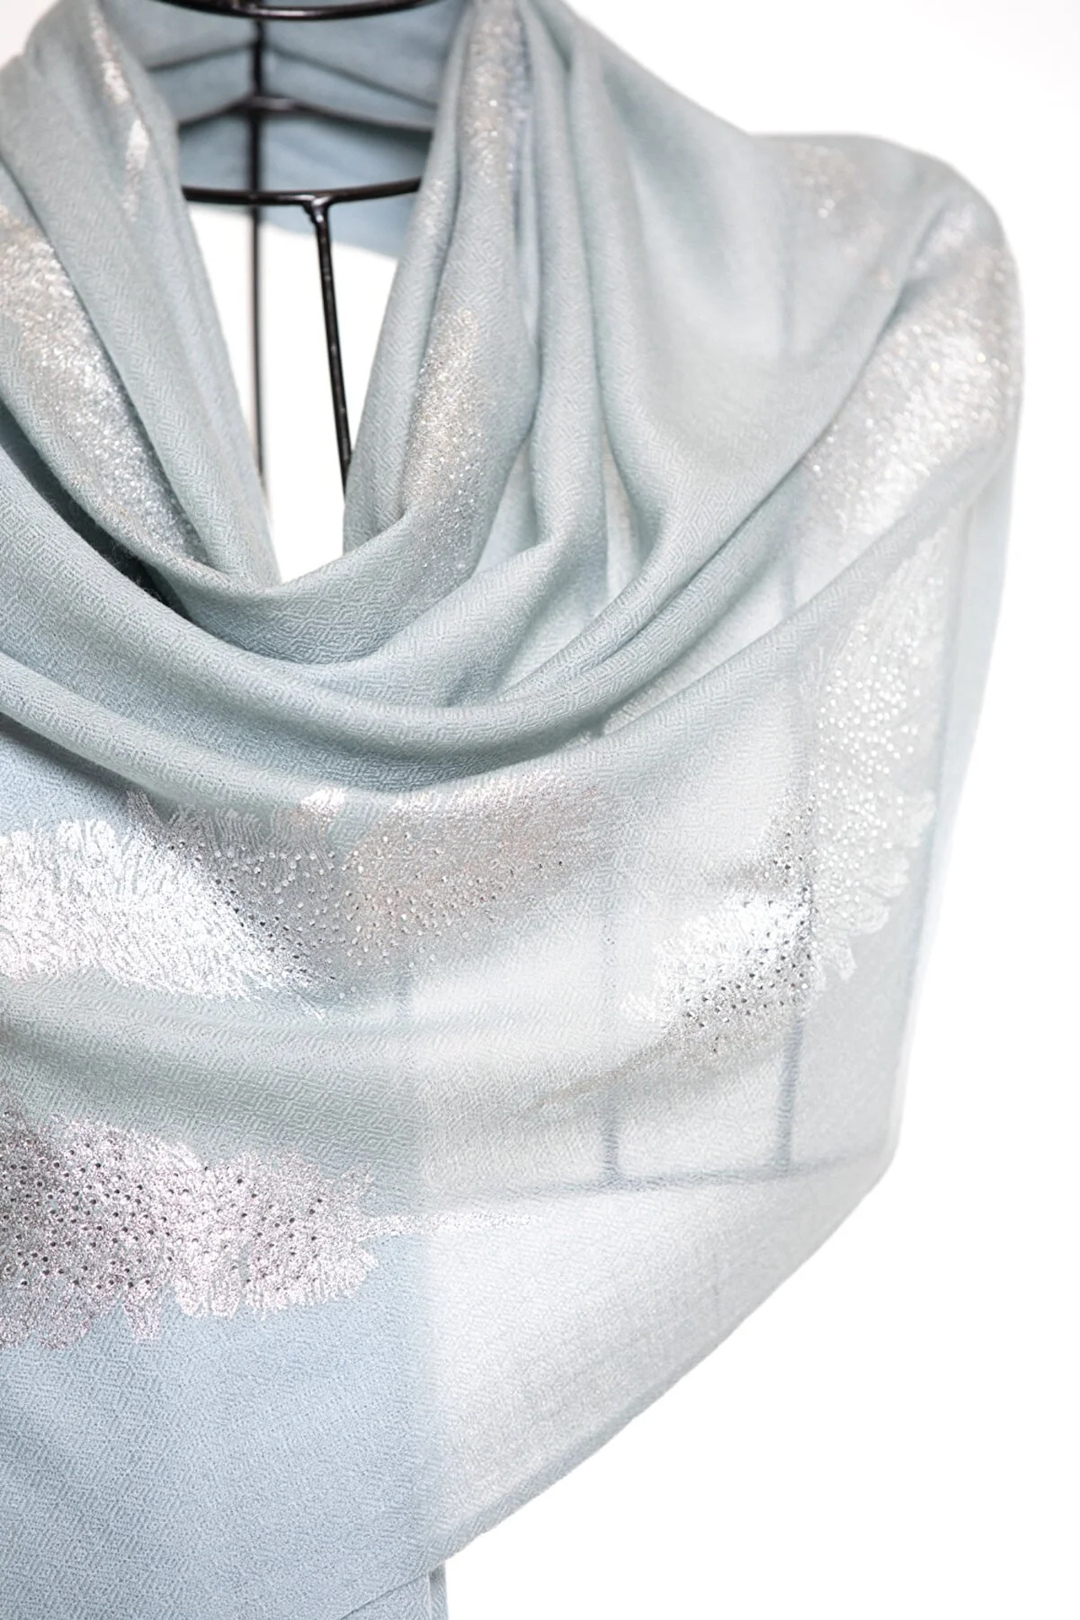 Angel Feathers Crystal Feathers Shawl Stole - Light Gray Rose